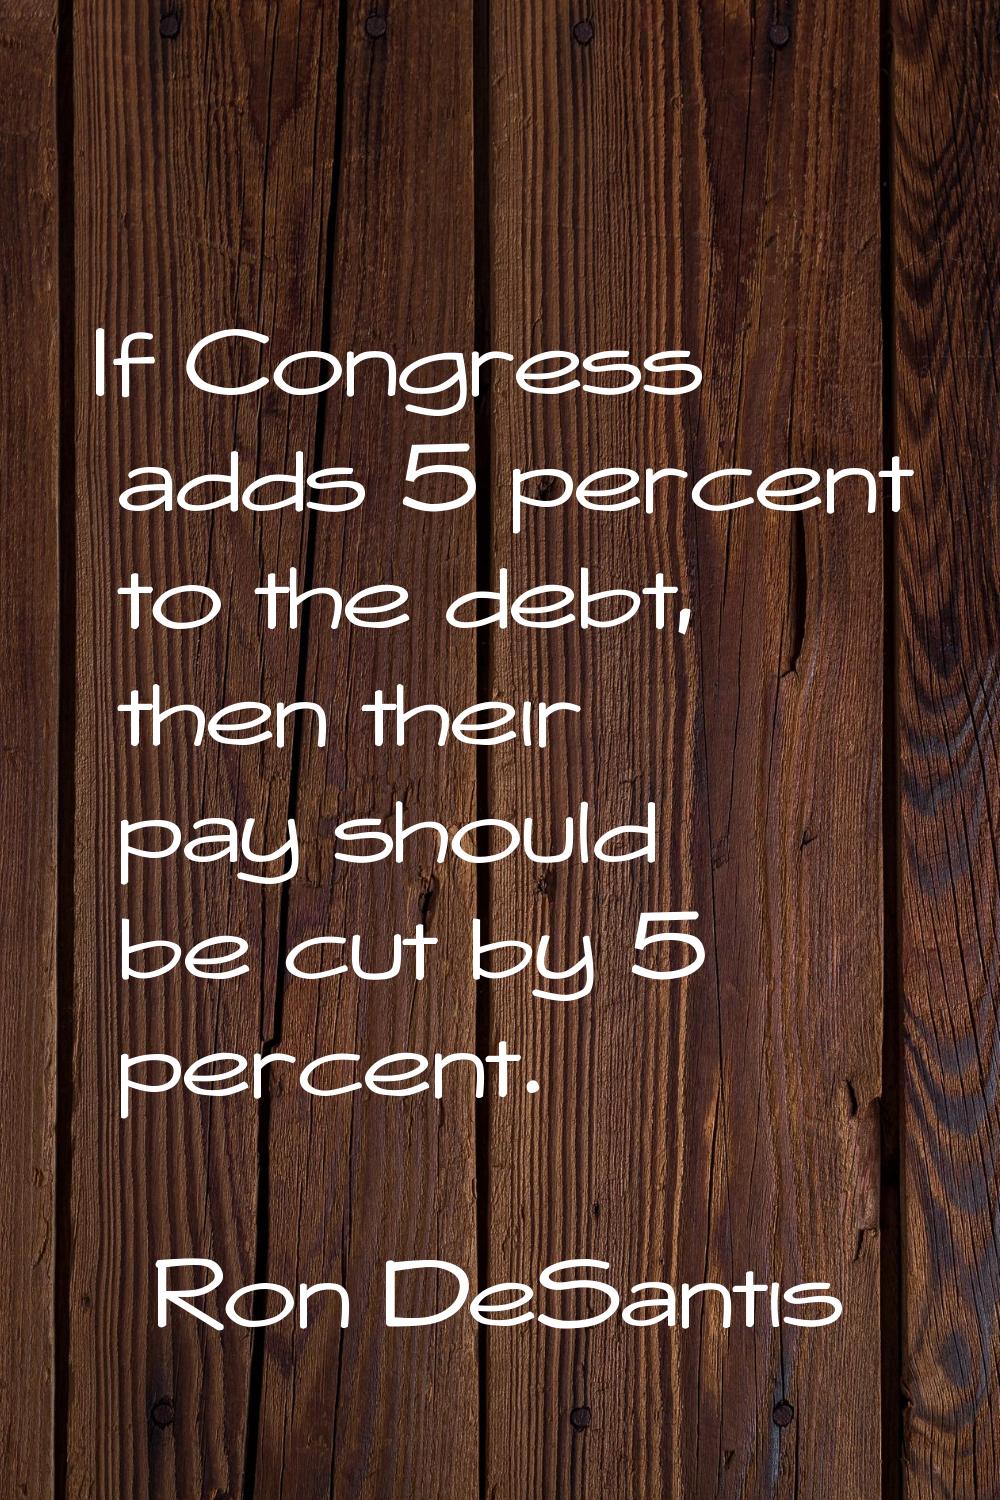 If Congress adds 5 percent to the debt, then their pay should be cut by 5 percent.